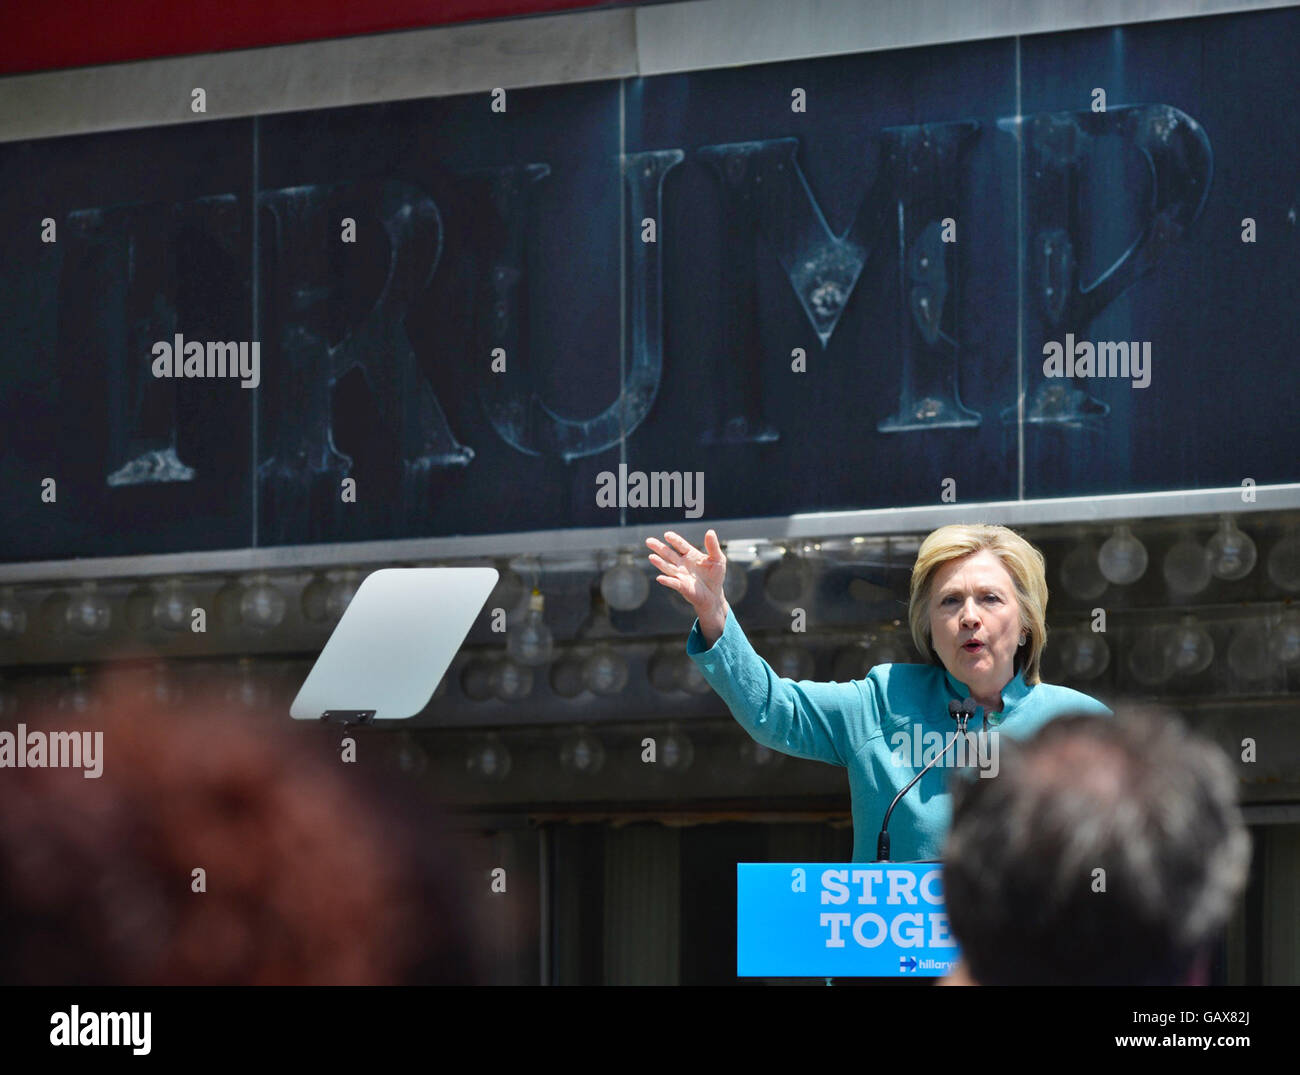 Atlantic City, New Jersey, USA. 6th July, 2016. Presumptive Democratic presidential nominee HILLARY CLINTON speaks at a campaign stop in front of the closed Trump Plaza Casino, on the Boardwalk. Clinton said'“What Donald Trump did in Atlantic City is nothing to brag about – it's shameful.' © Bastiaan Slabbers/ZUMA Wire/Alamy Live News Stock Photo